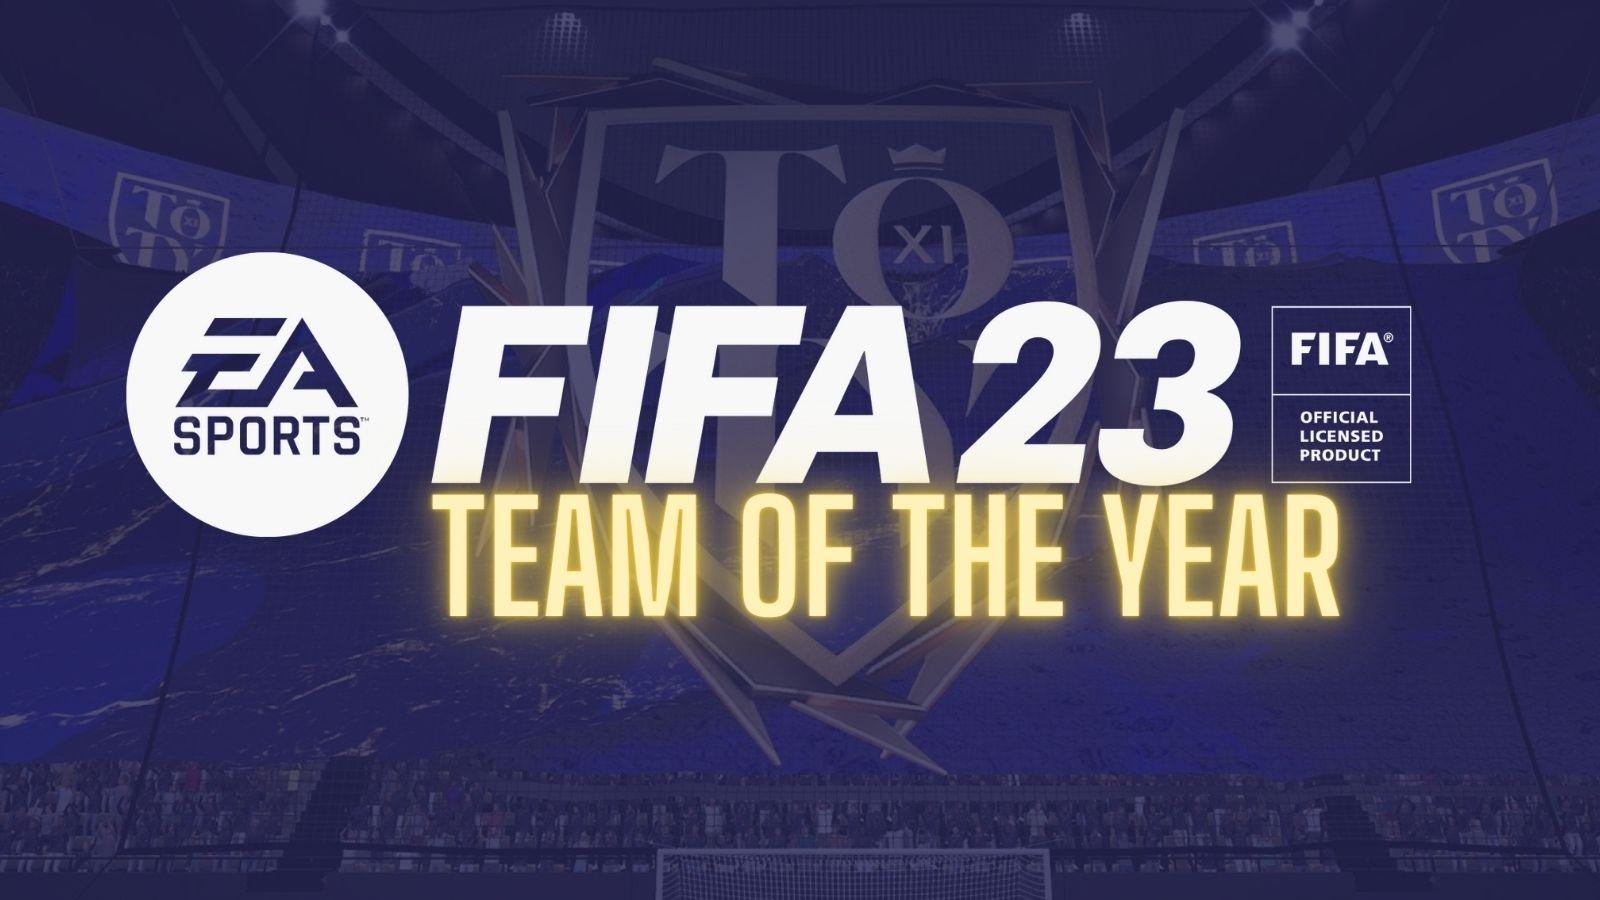 FIFA 23 Team of the Year promo